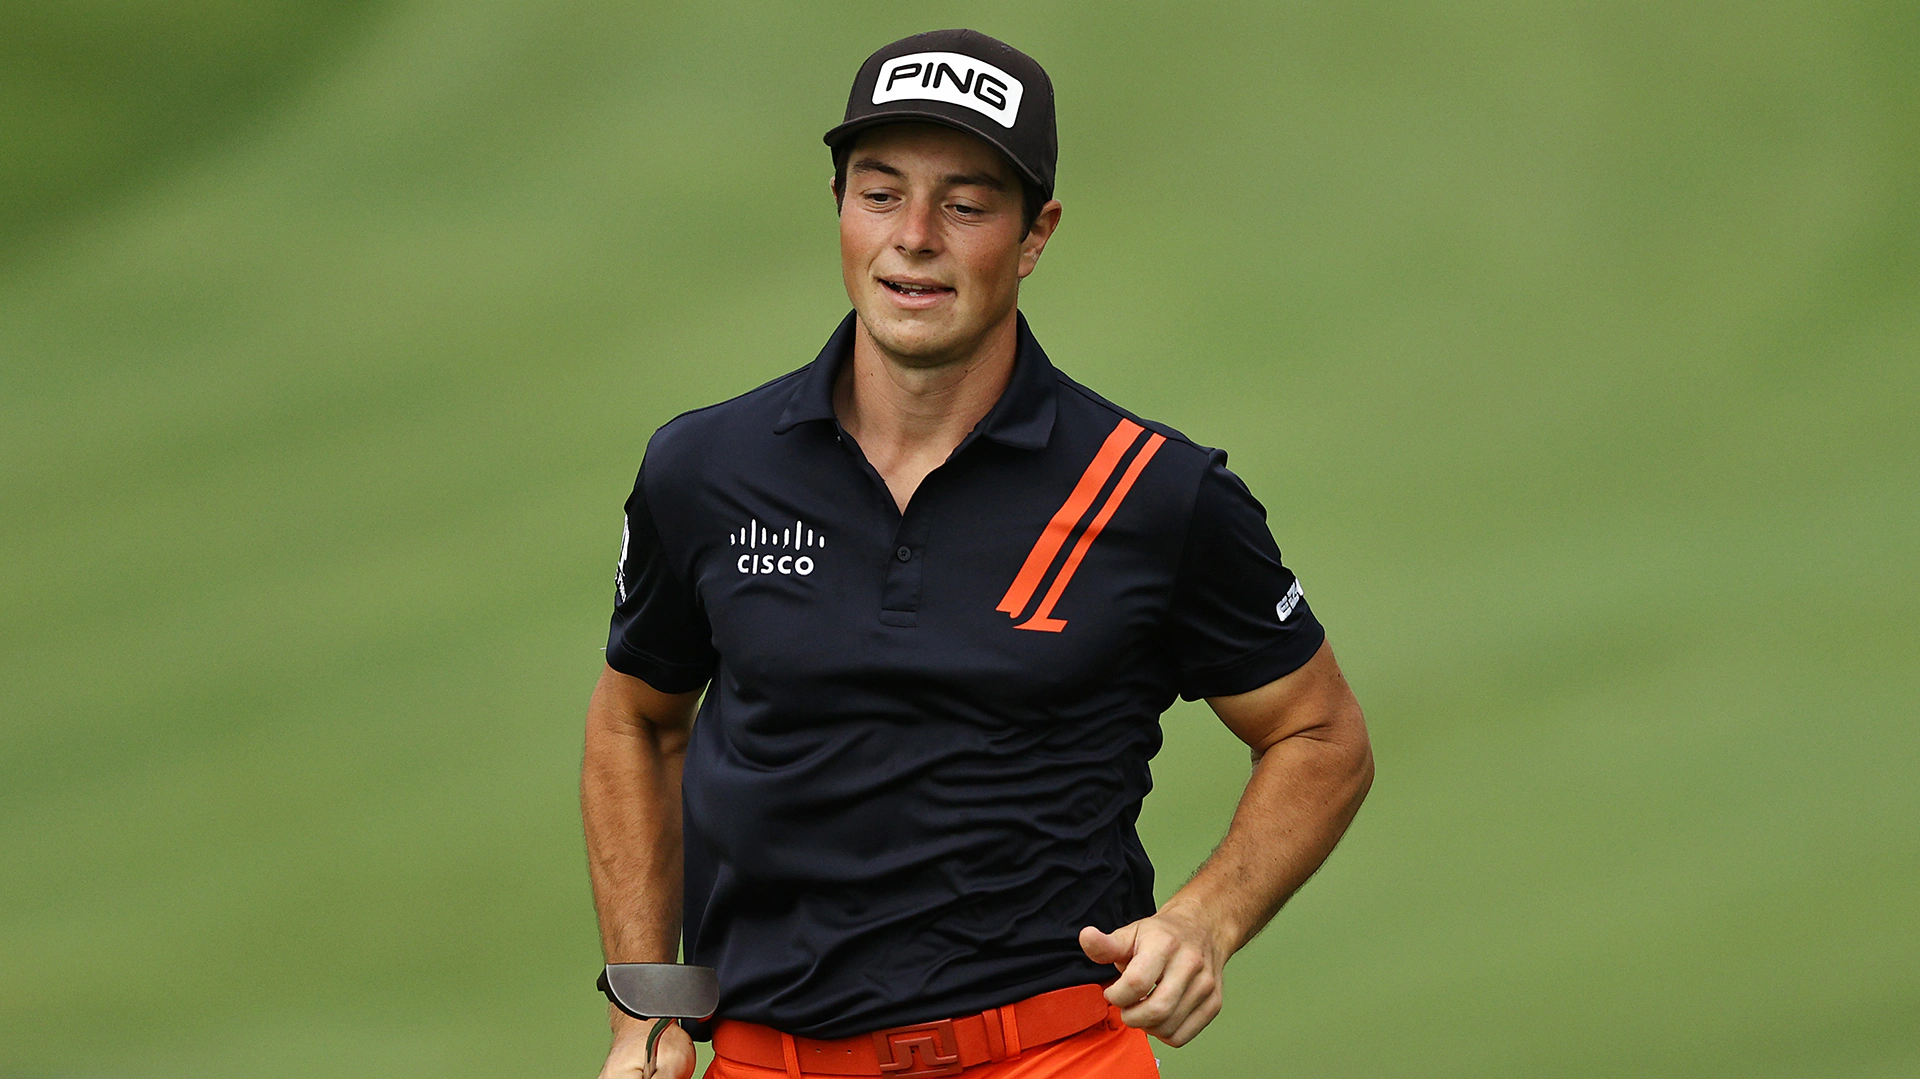 Forget protein shakes, Viktor Hovland once consumed six energy drinks